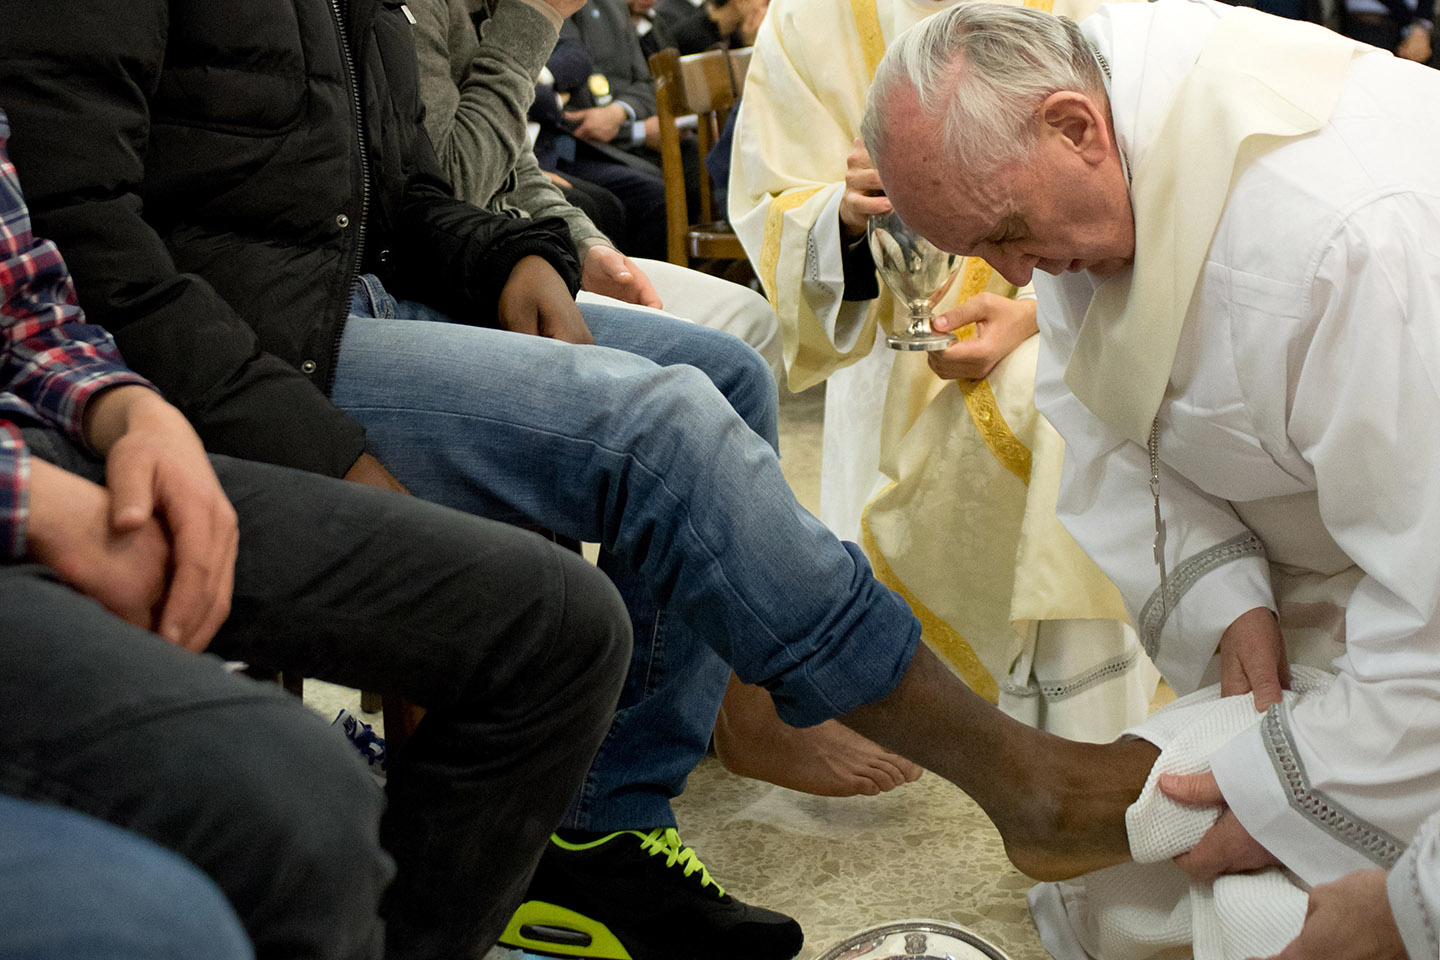 ITALY-VATICAN-POPE-PRISON-EASTER-HOLY THURSDAY